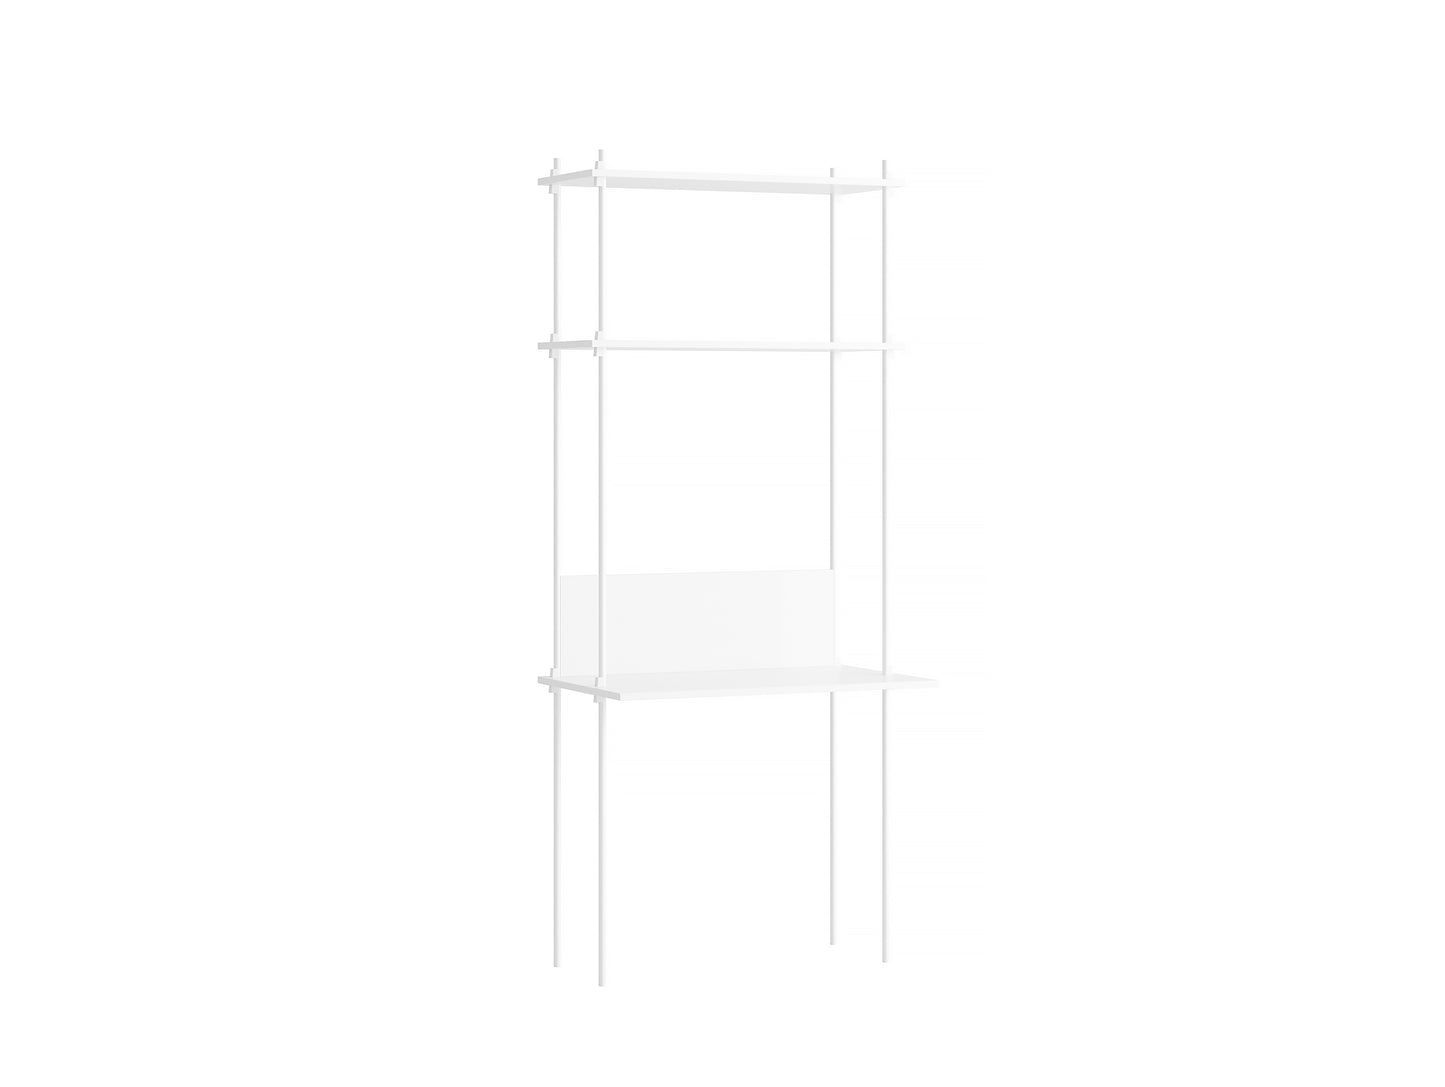 Moebe Shelving System - S.200.1.D Set in White / White Lacquered Finish